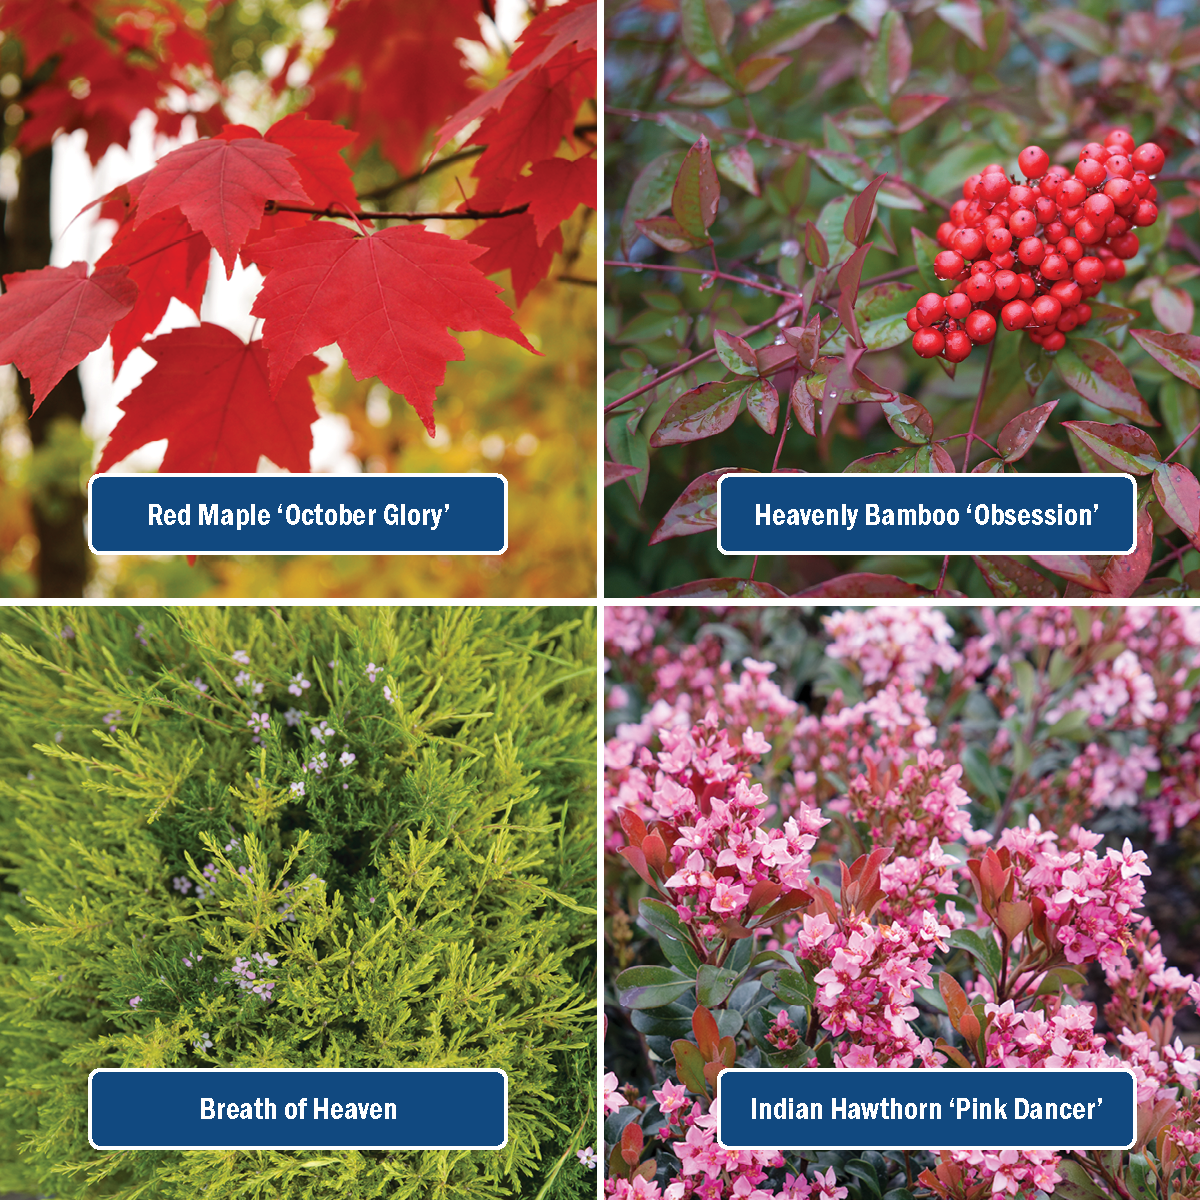 Plant list includes: Red Maple October Glory, Heavenly Bamboo Obsession, Breath of Heaven, Indian Hawthorn Pink Dancer, Red Maple October Glory